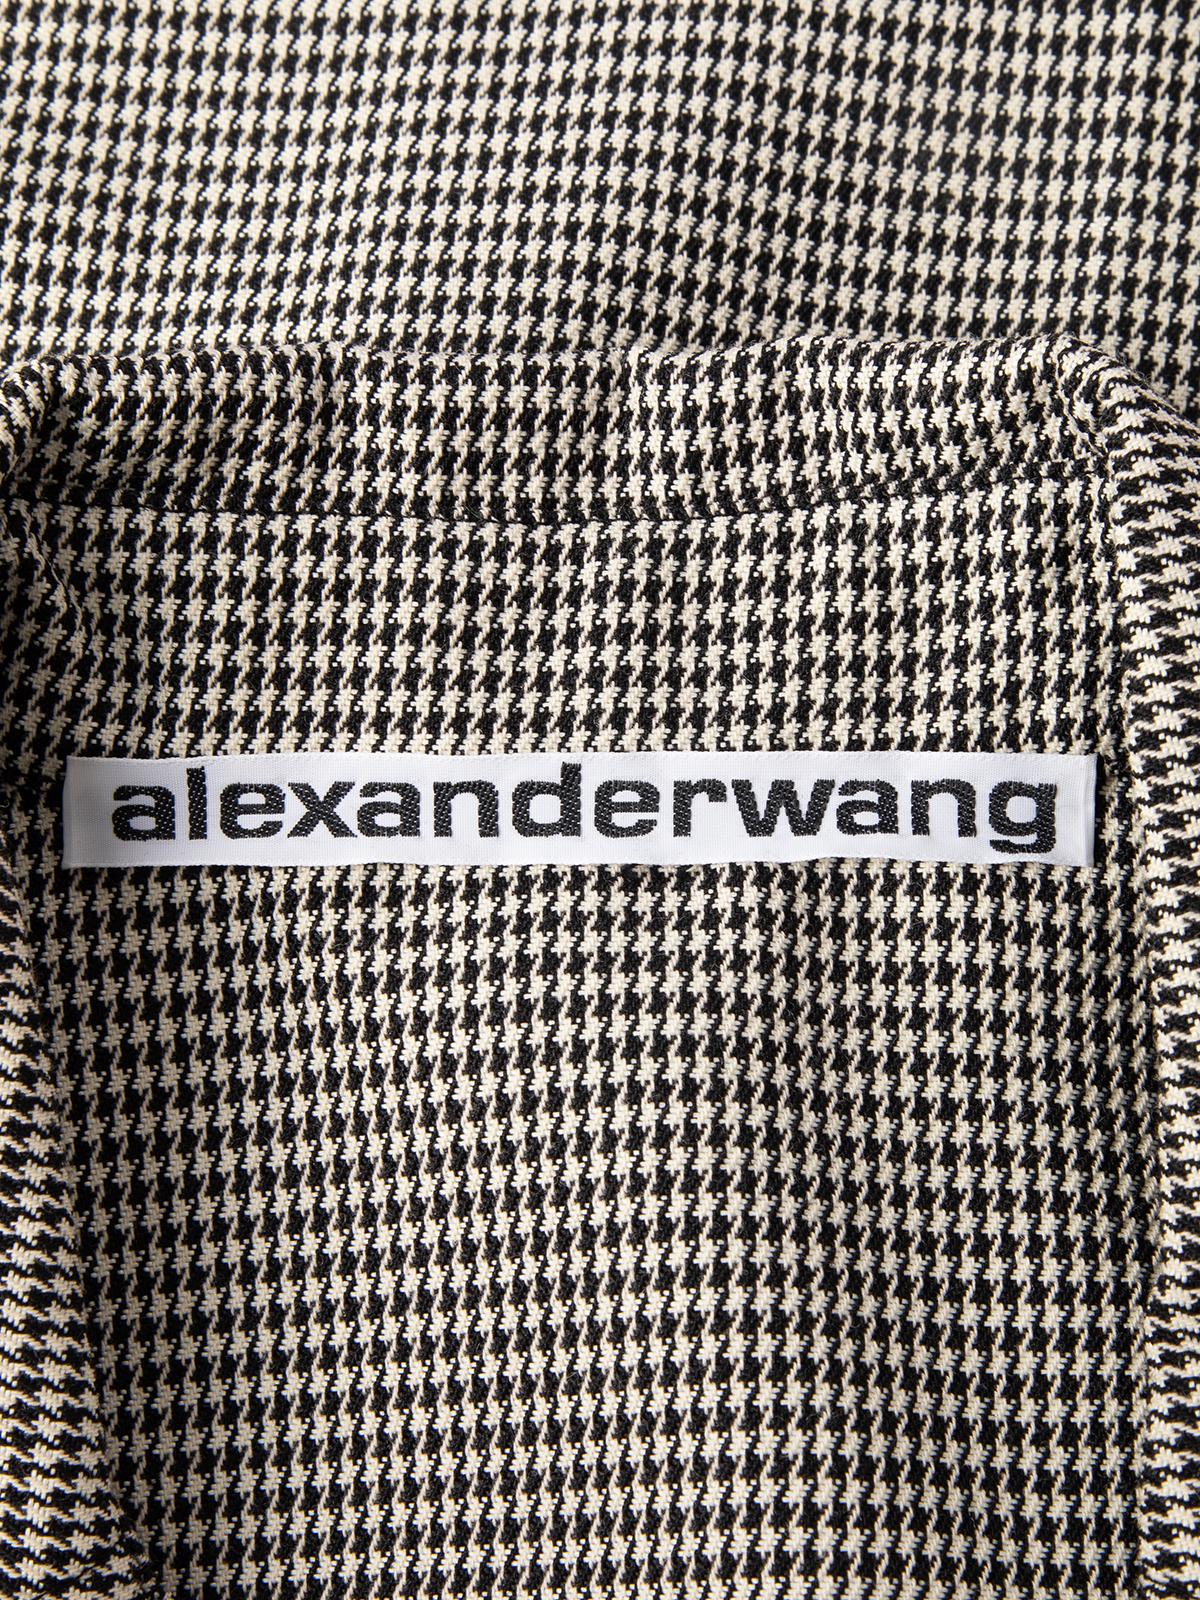 Pre-Loved Alexander Wang Women's Houndstooth Shirt Jacket In Good Condition For Sale In London, GB